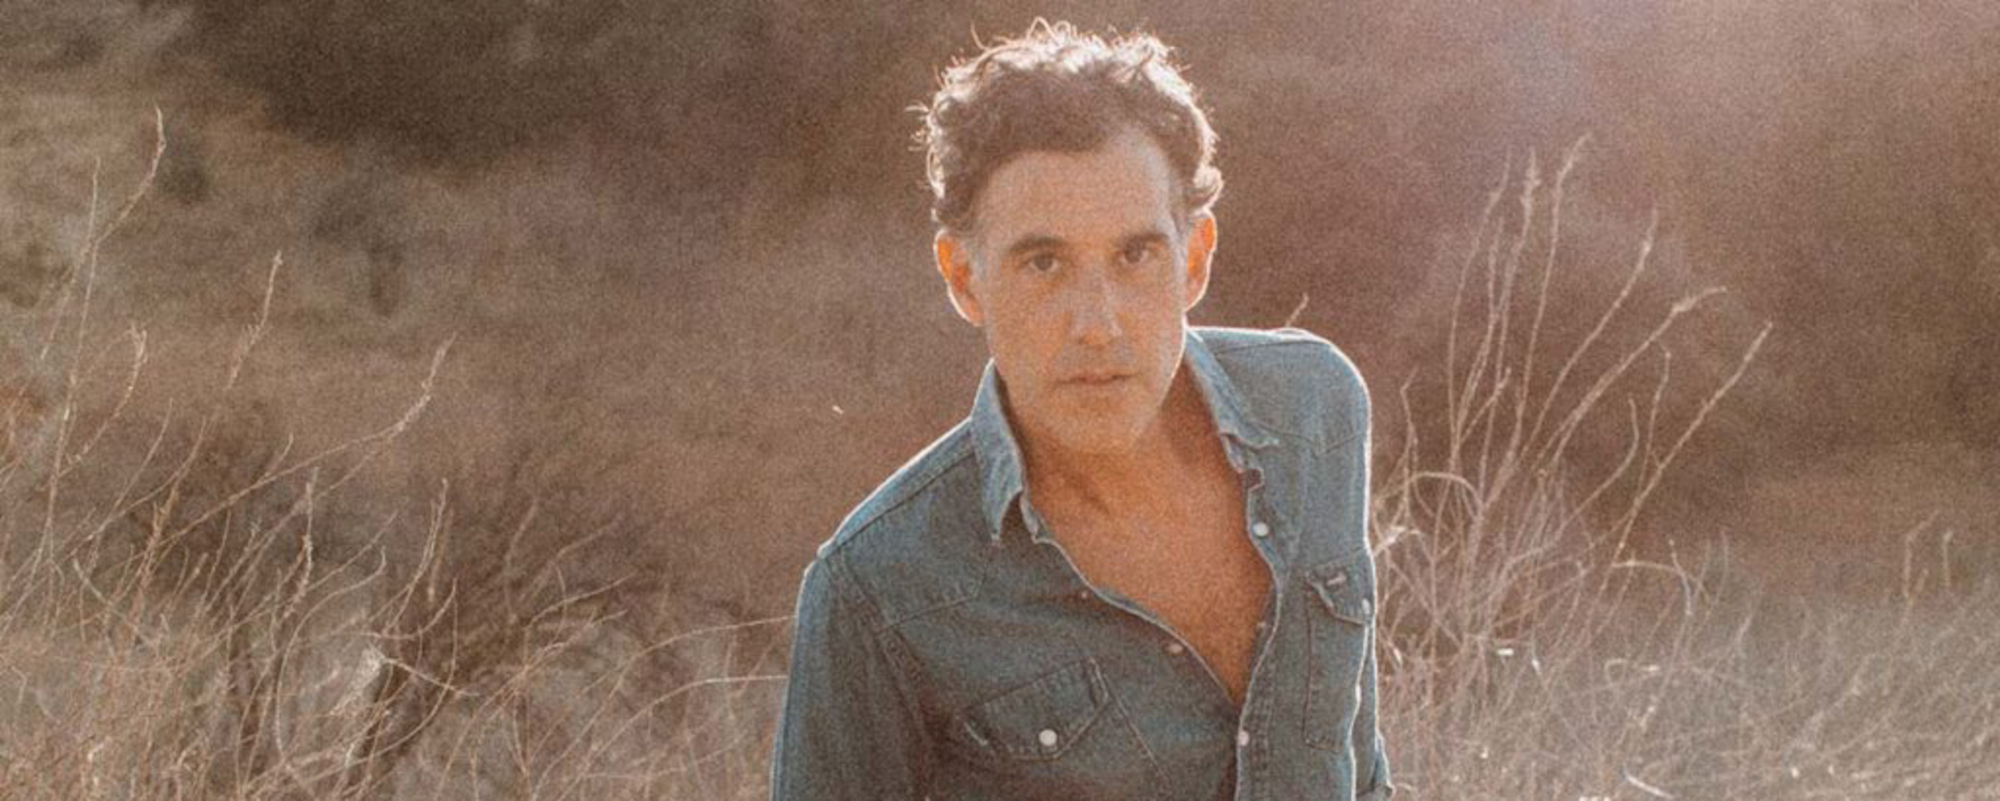 Joshua Radin Delves Into the Fear of Intimacy on New Album